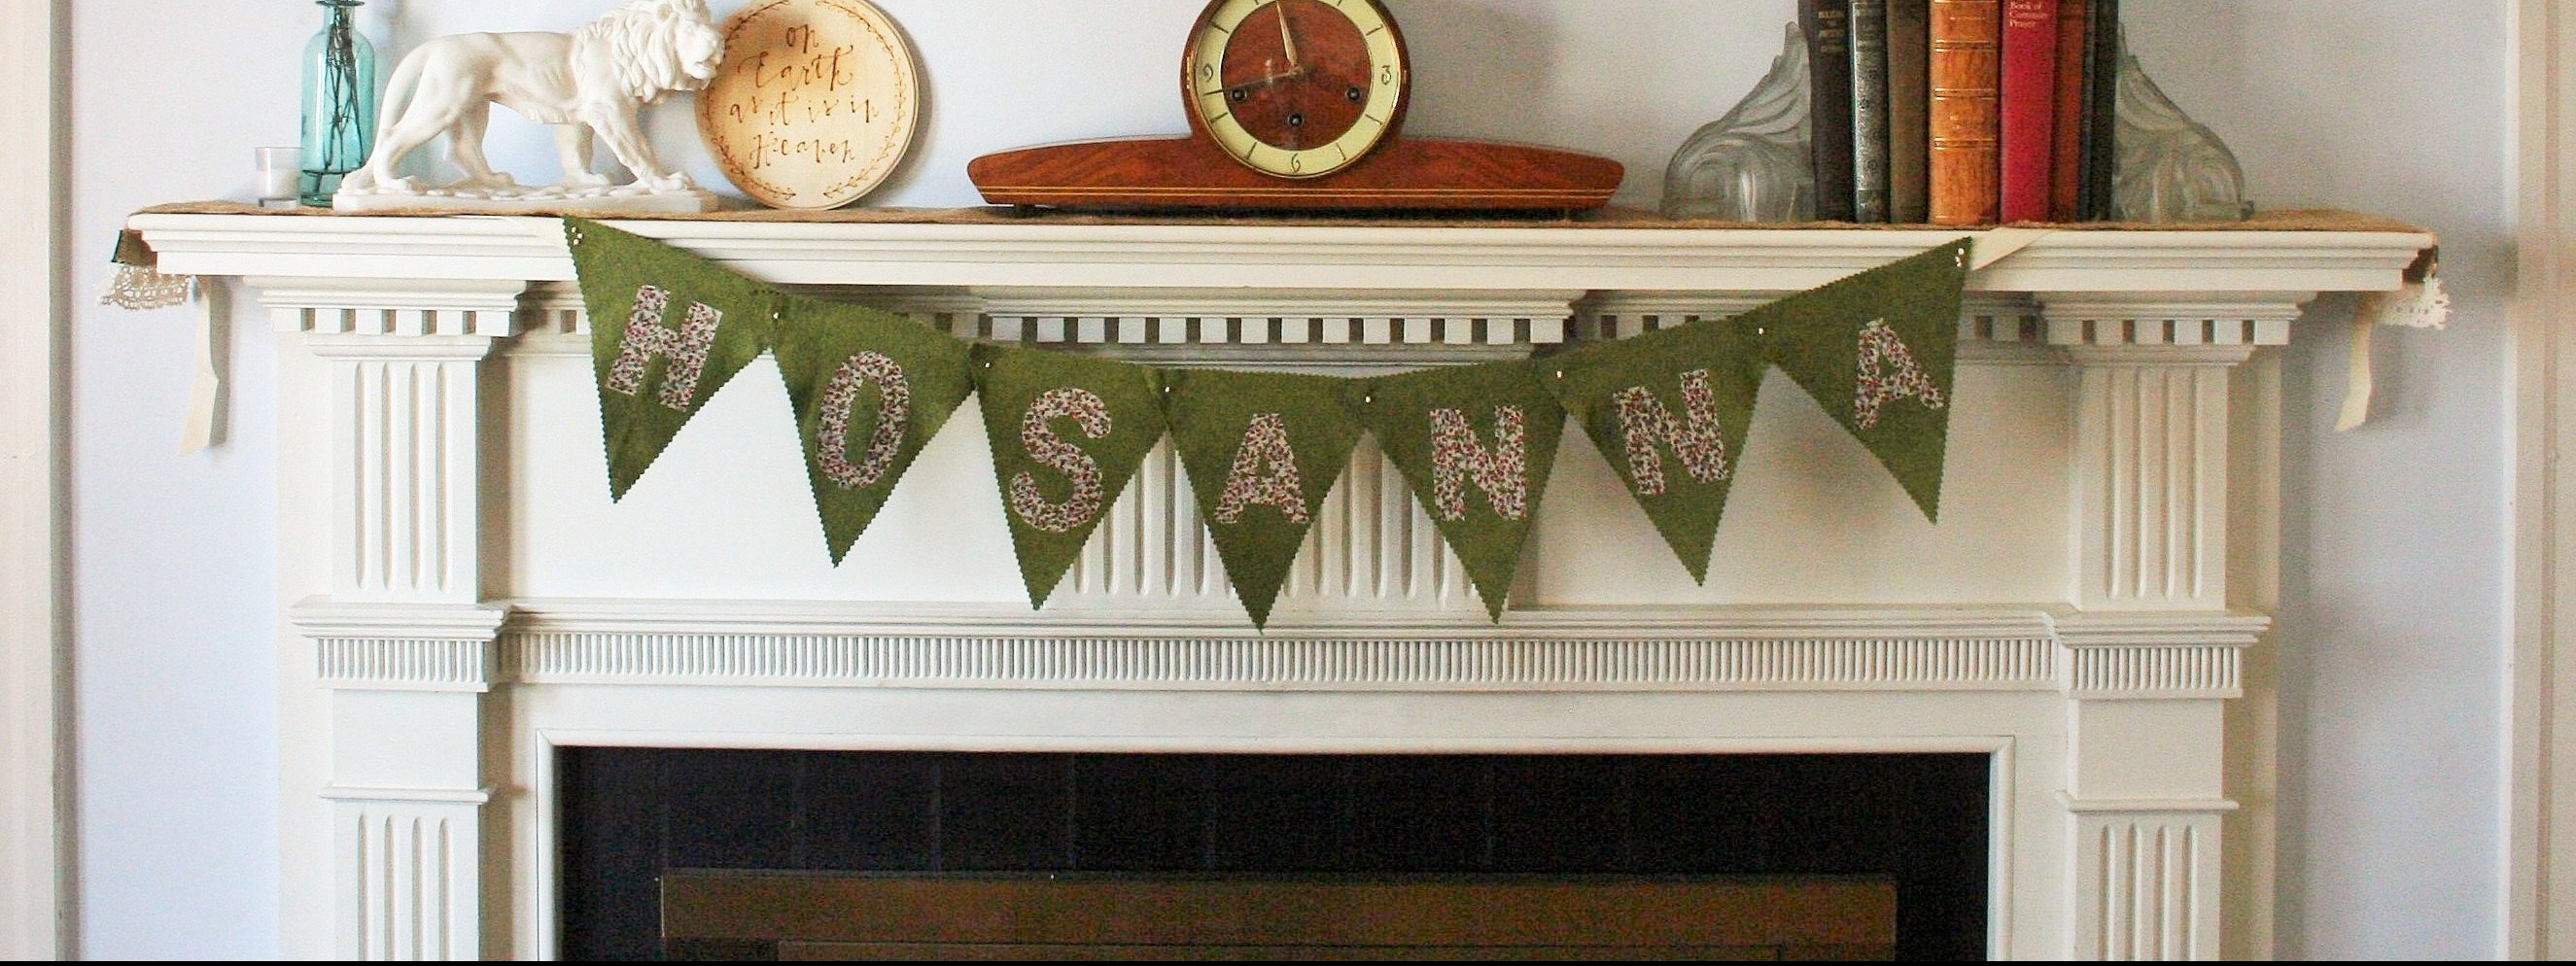 No-Sew Holiday Banner Tutorial